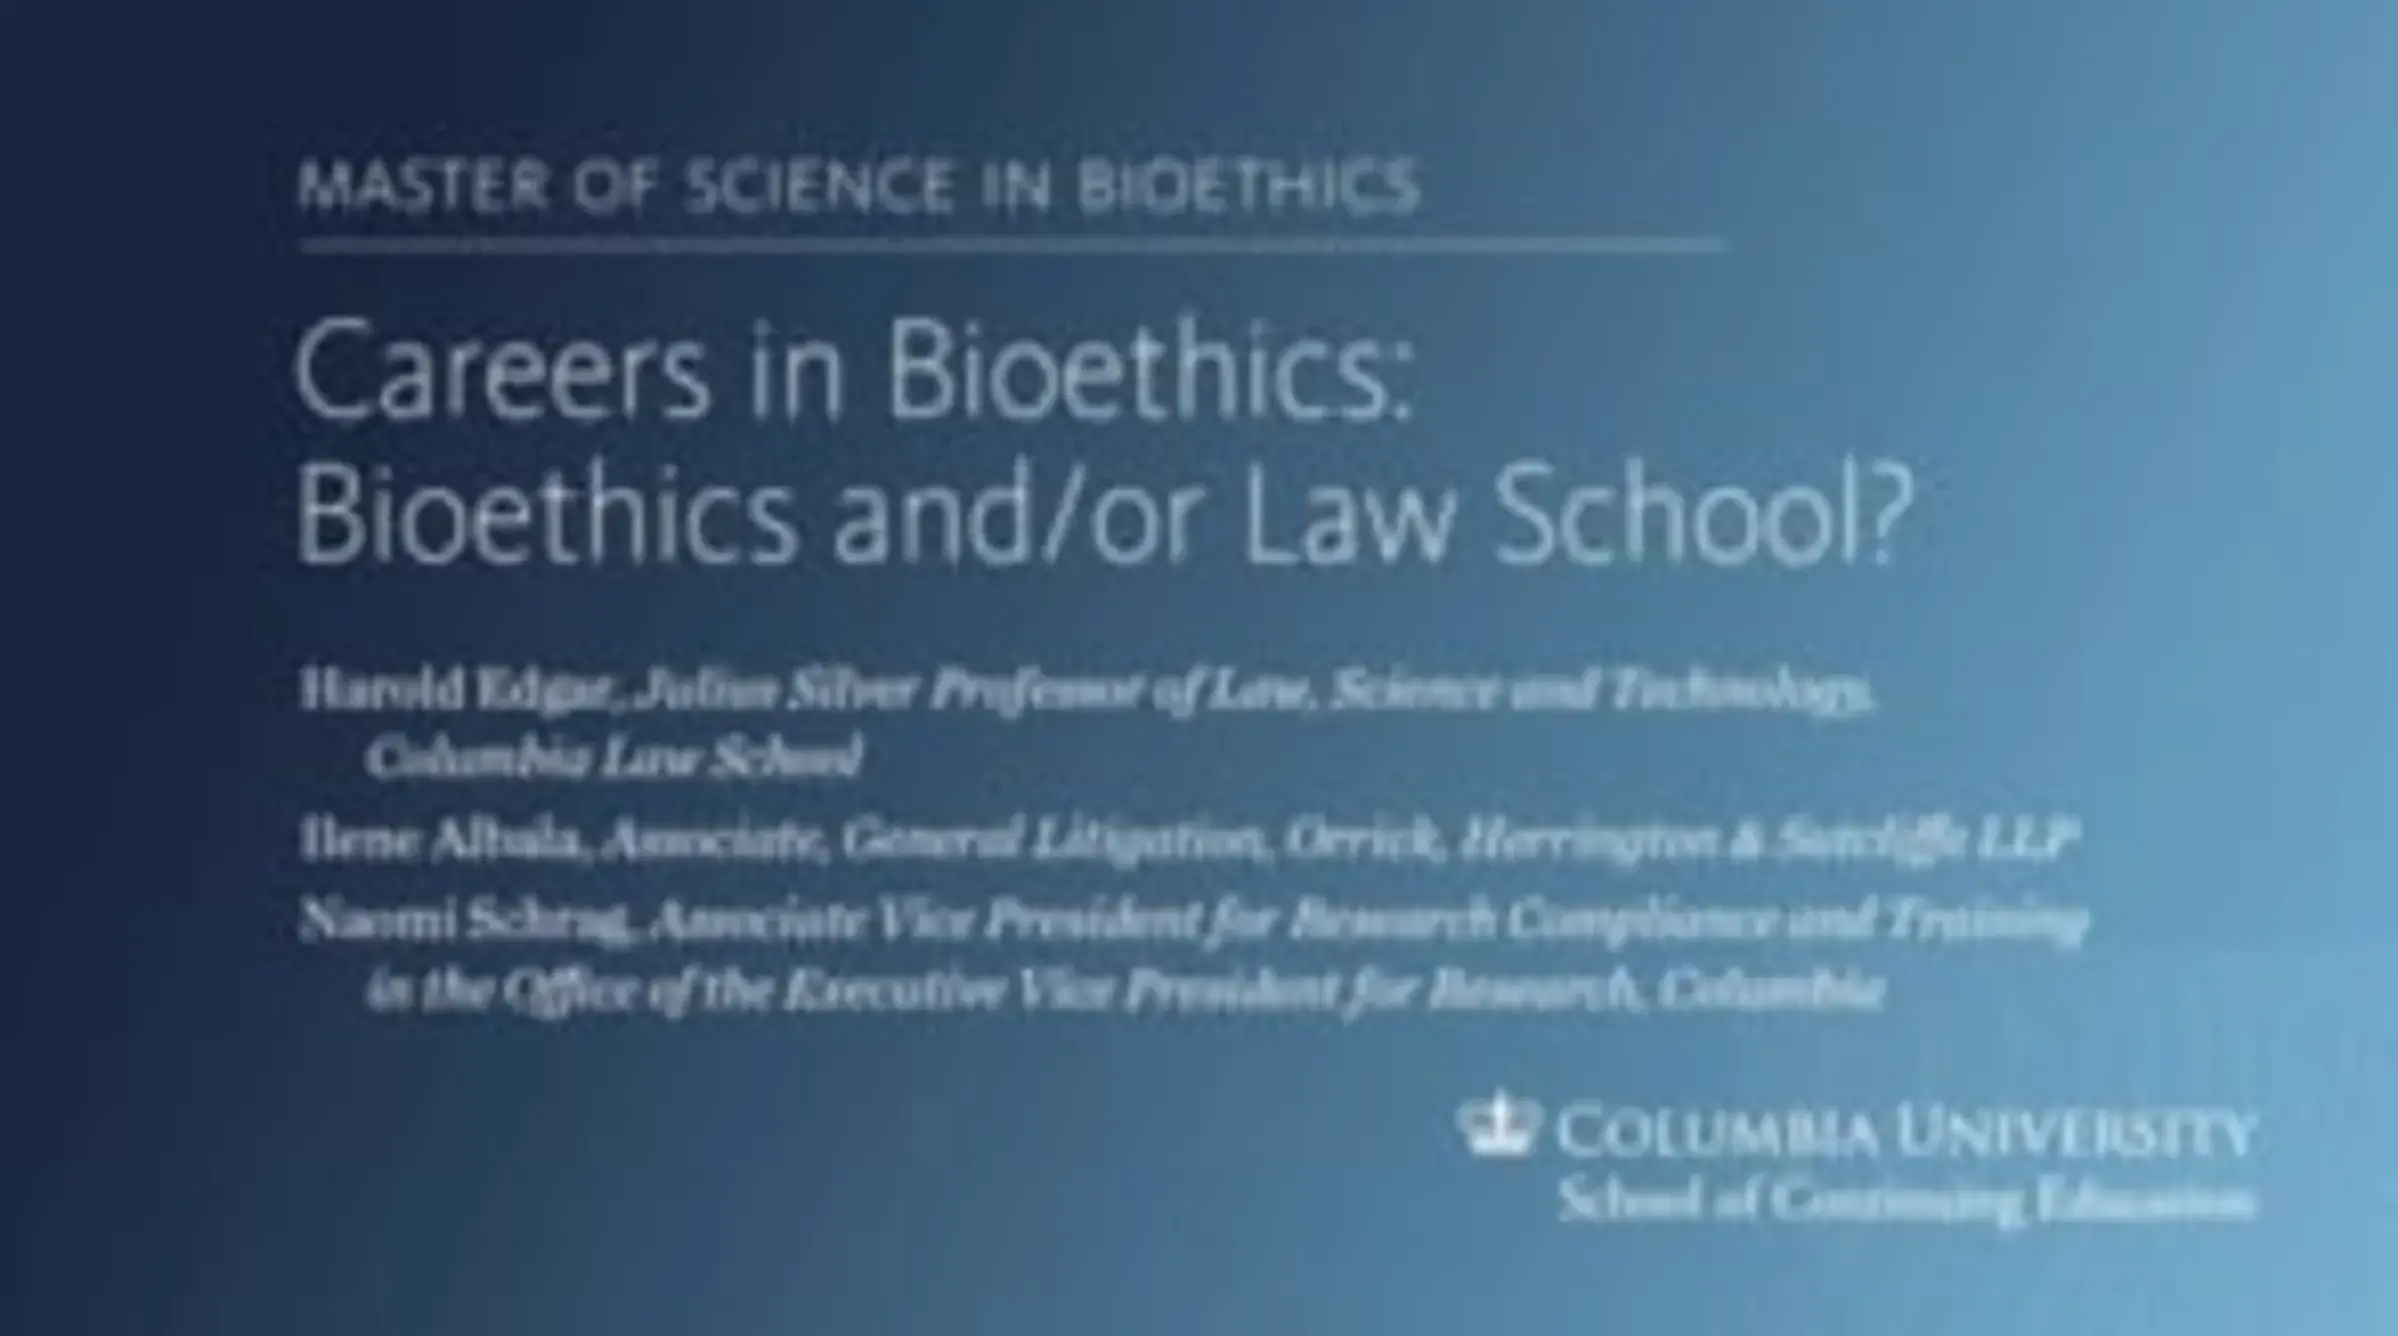 Careers in Bioethics: Bioethics and/or Law School?